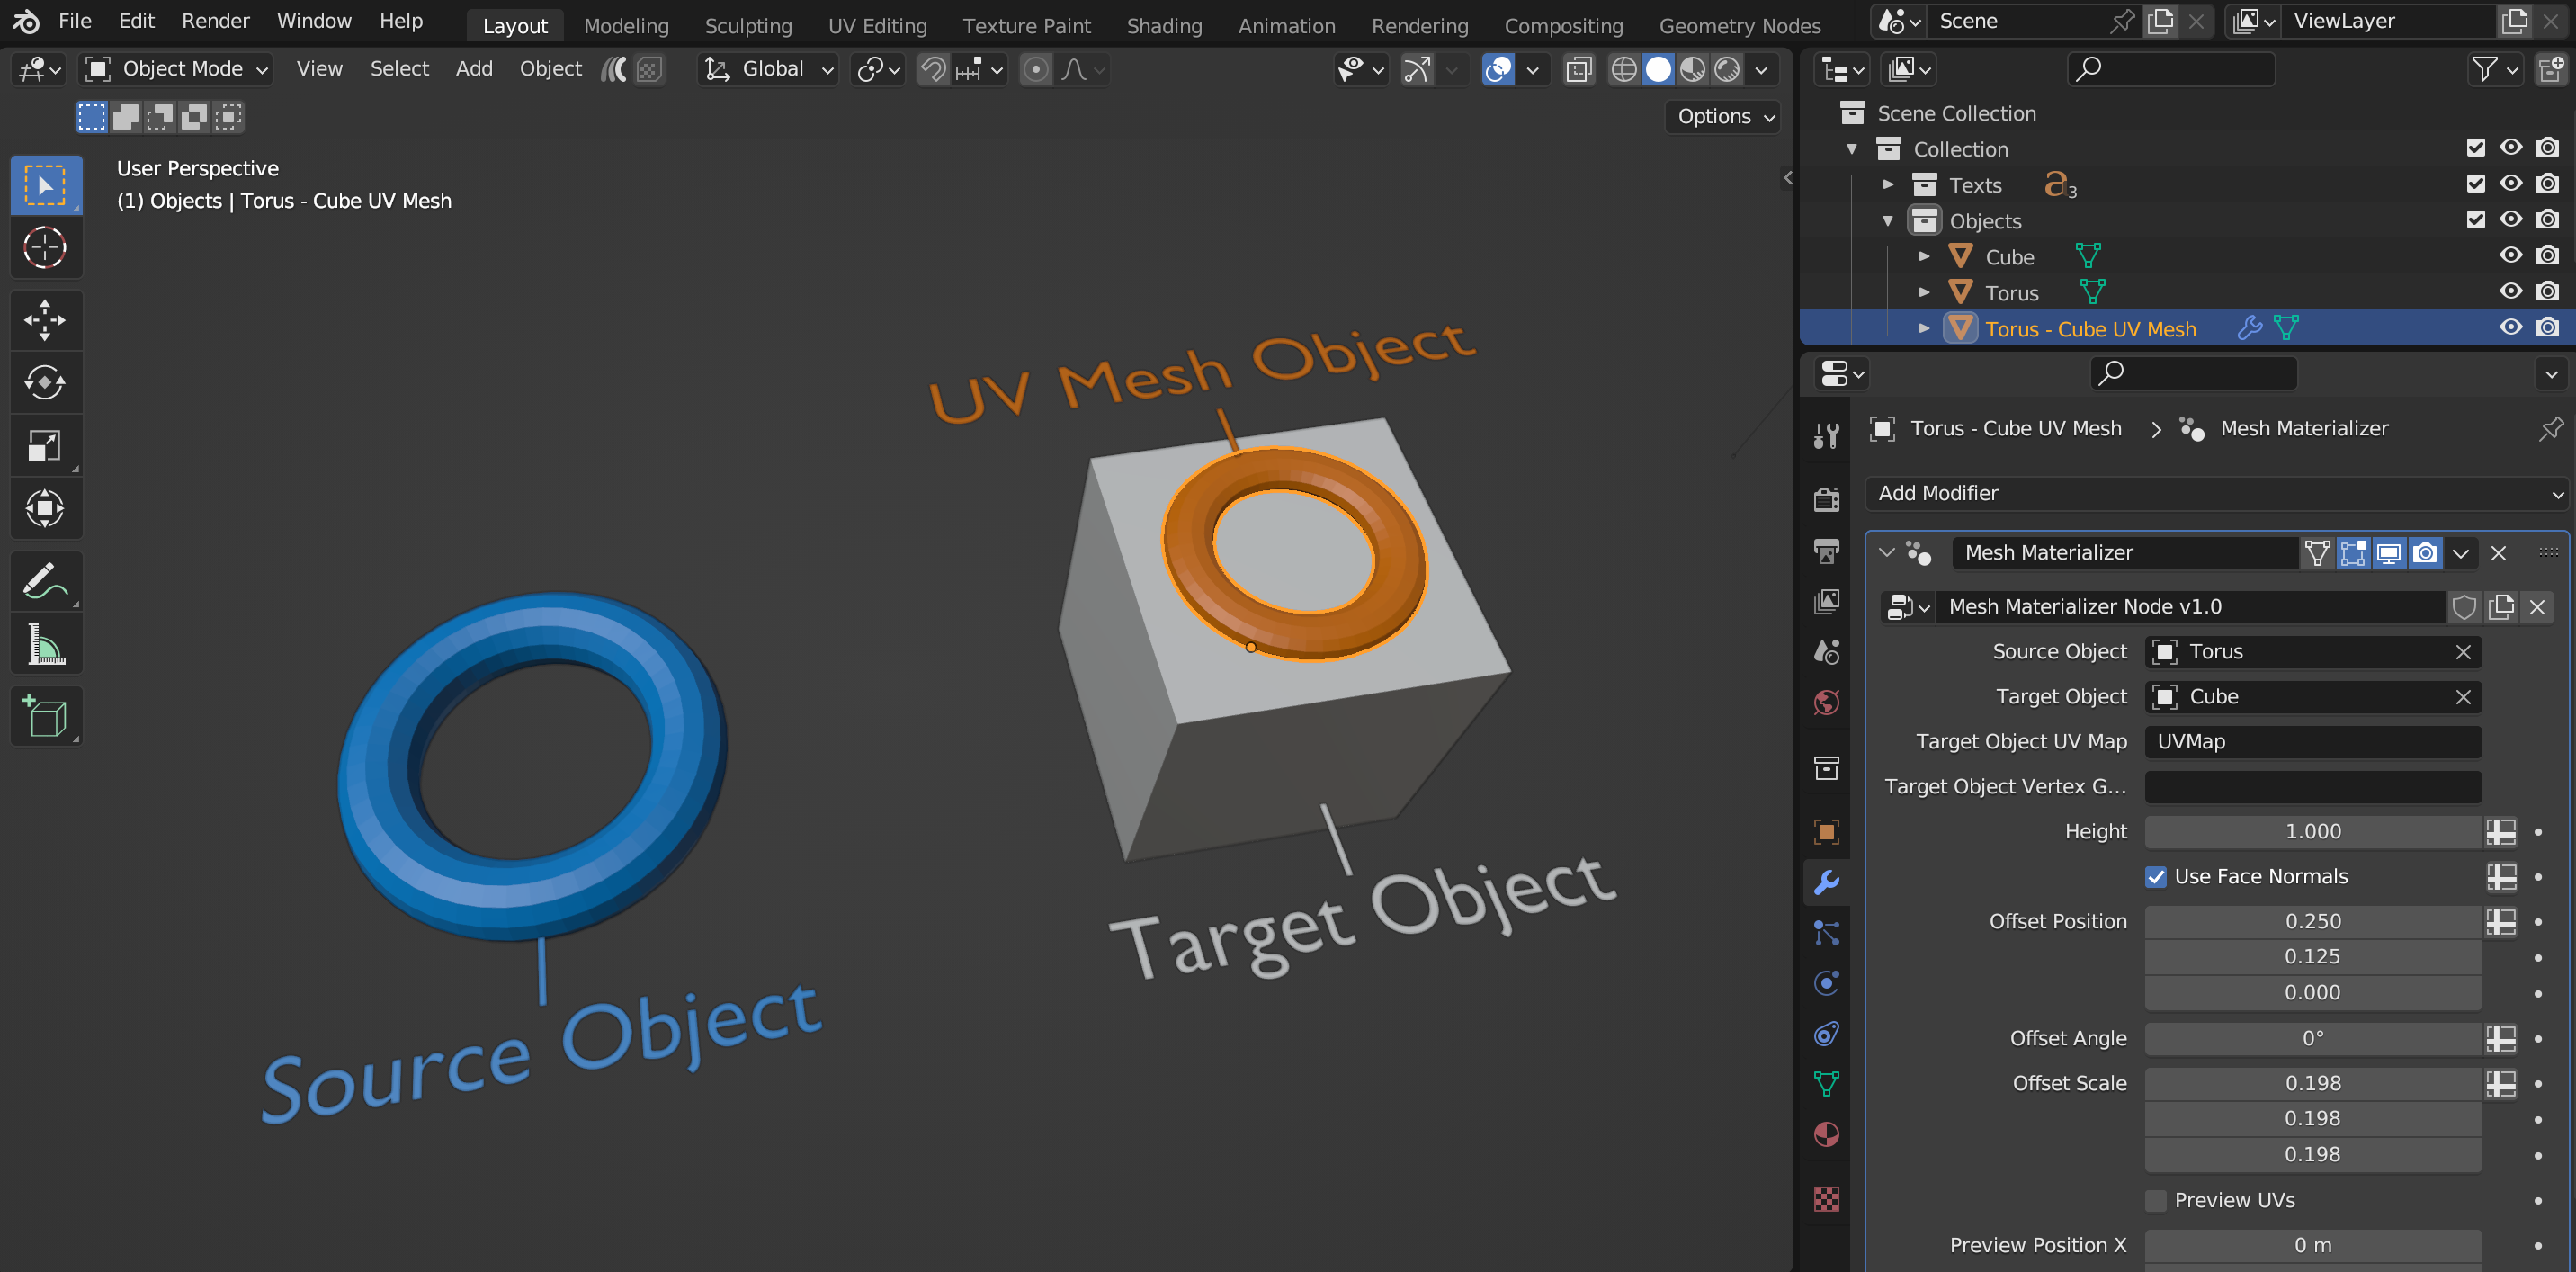 The Source Object, Target Object and Materialized Object.